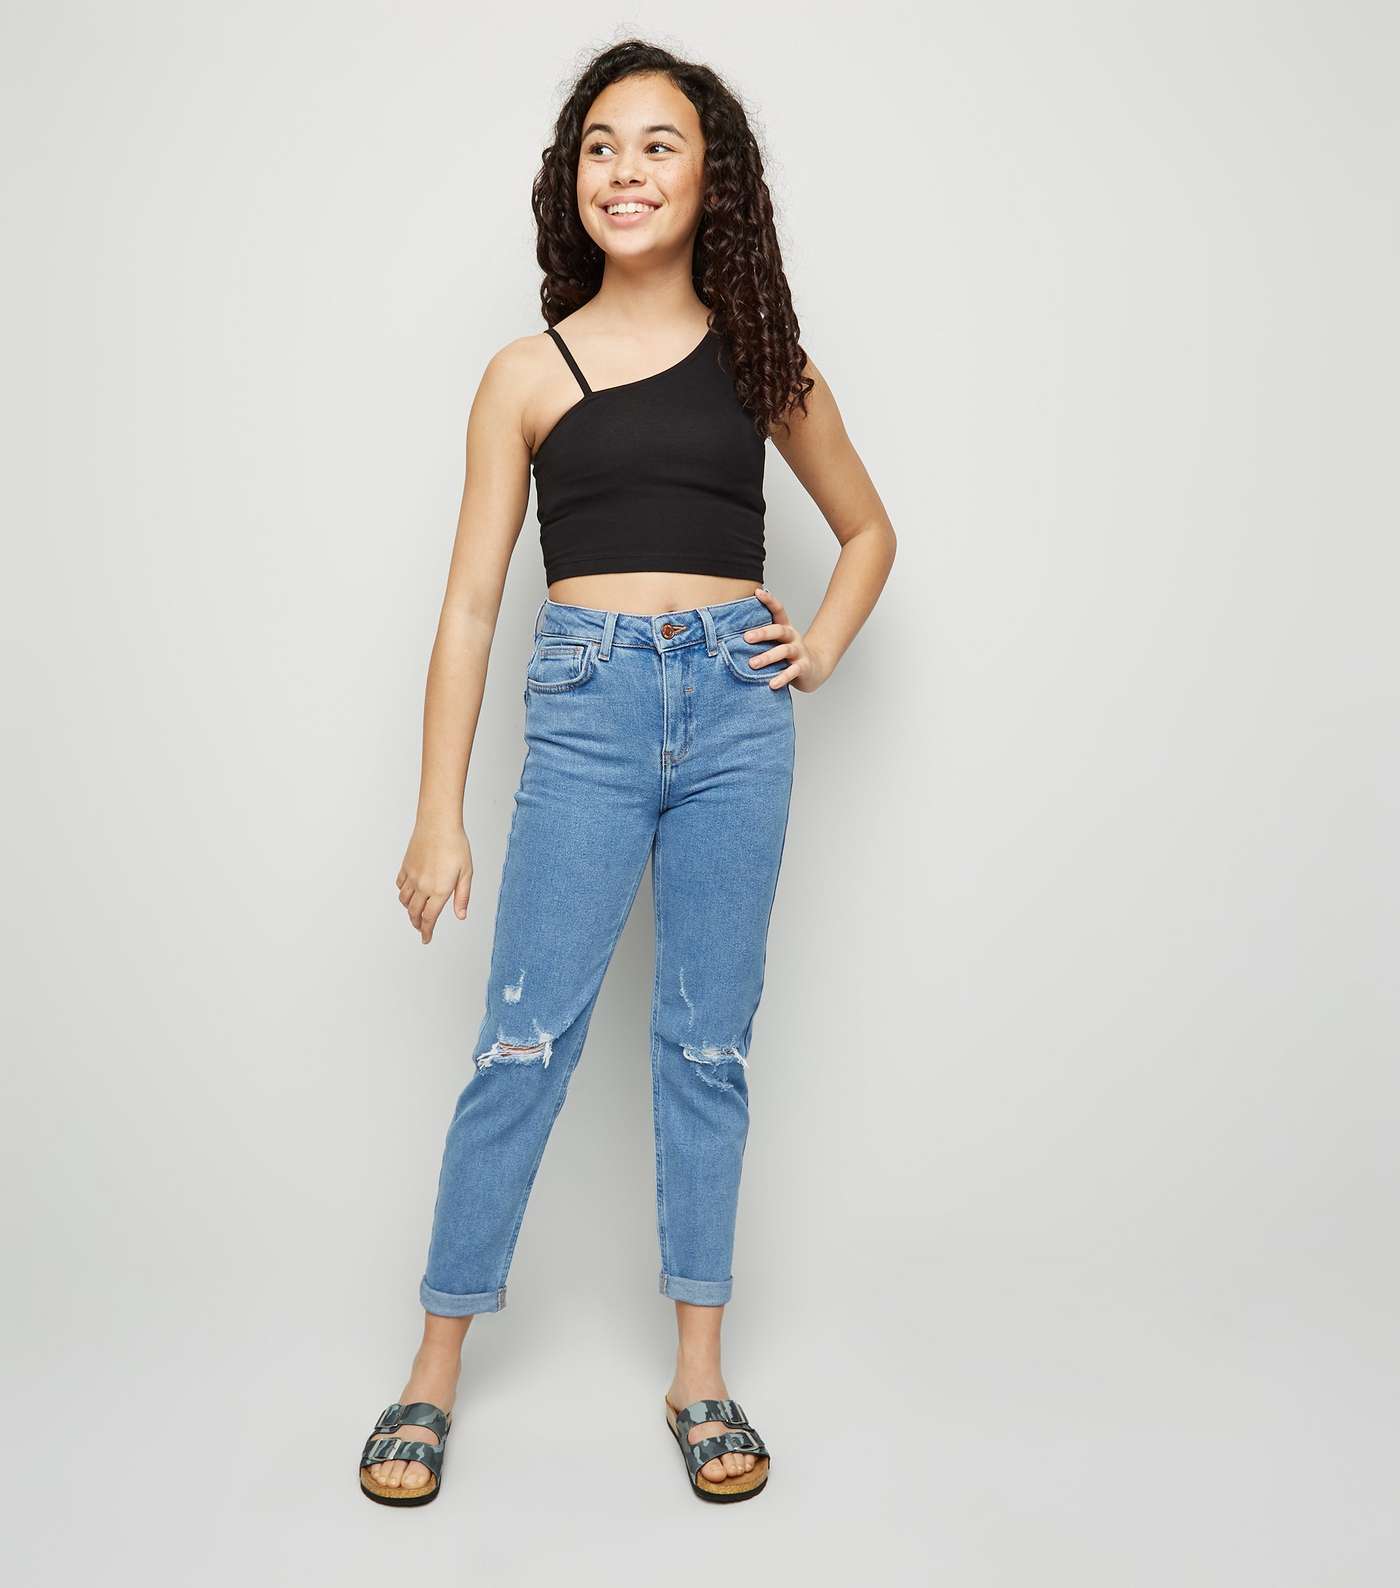 Girls Pale Blue Ripped Stretch Mom Jeans 